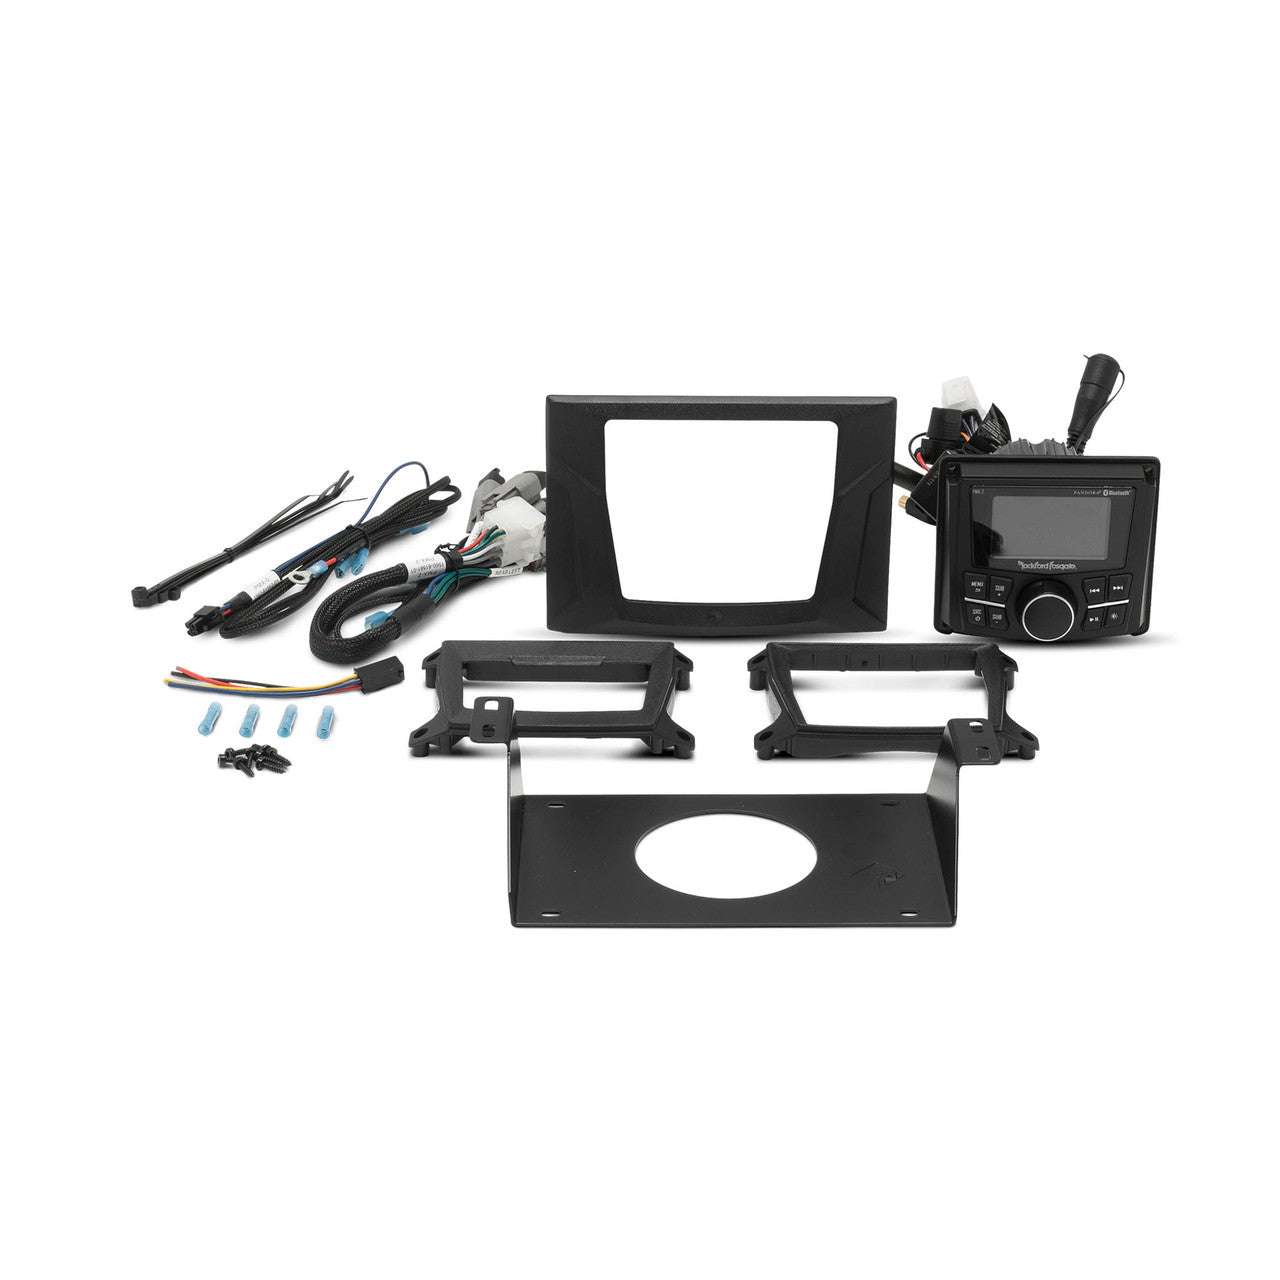 Rockford Fosgate GNRL-STAGE 1 Stereo Kit Compatible With Select General Models